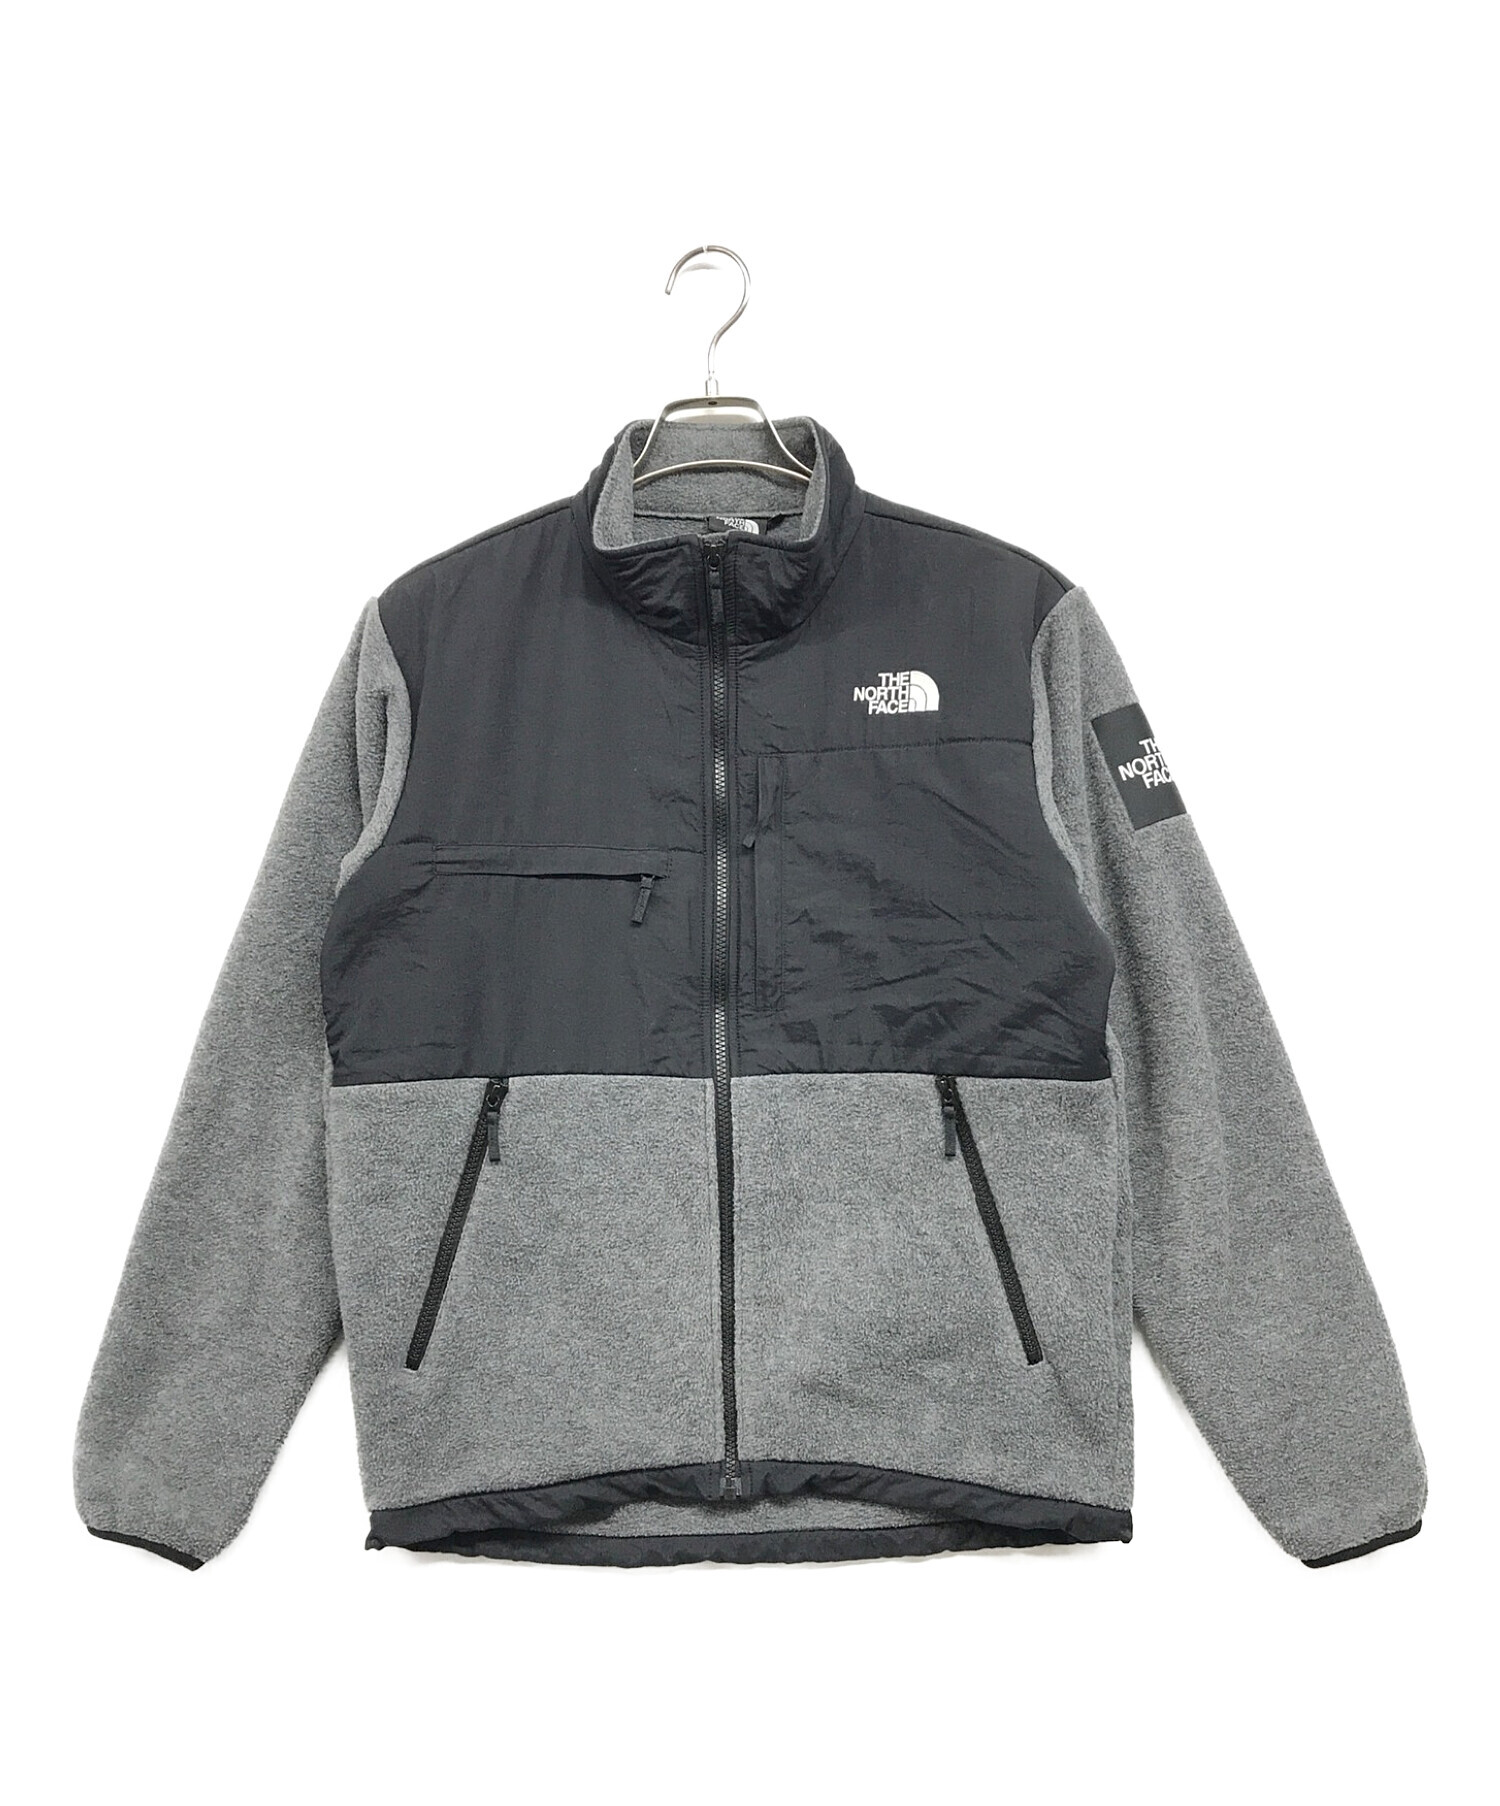 THE NORTH FACE デナリジャケットS